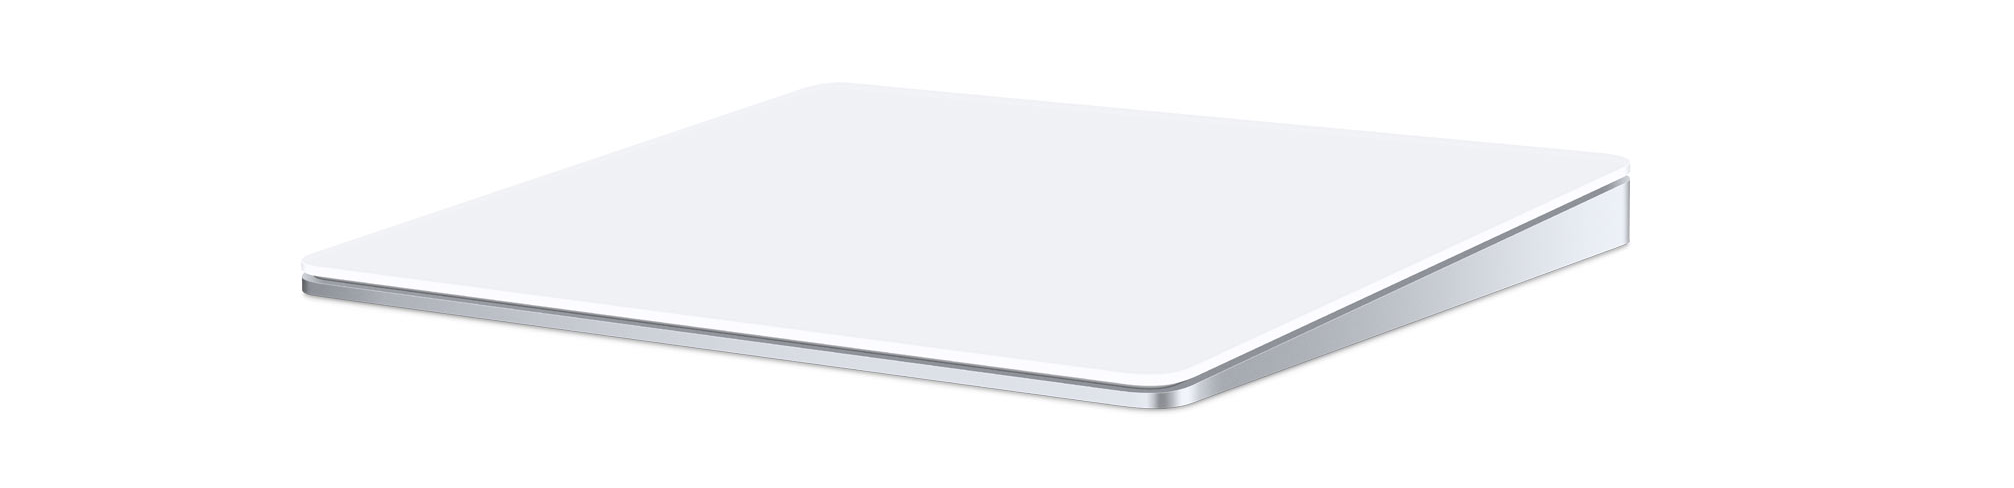 Screen Shot 2015 10 13 at 10.10.03 PM - Apple launches the Magic Trackpad 2 with Force Touch, Magic Mouse 2 & Magic Keyboard